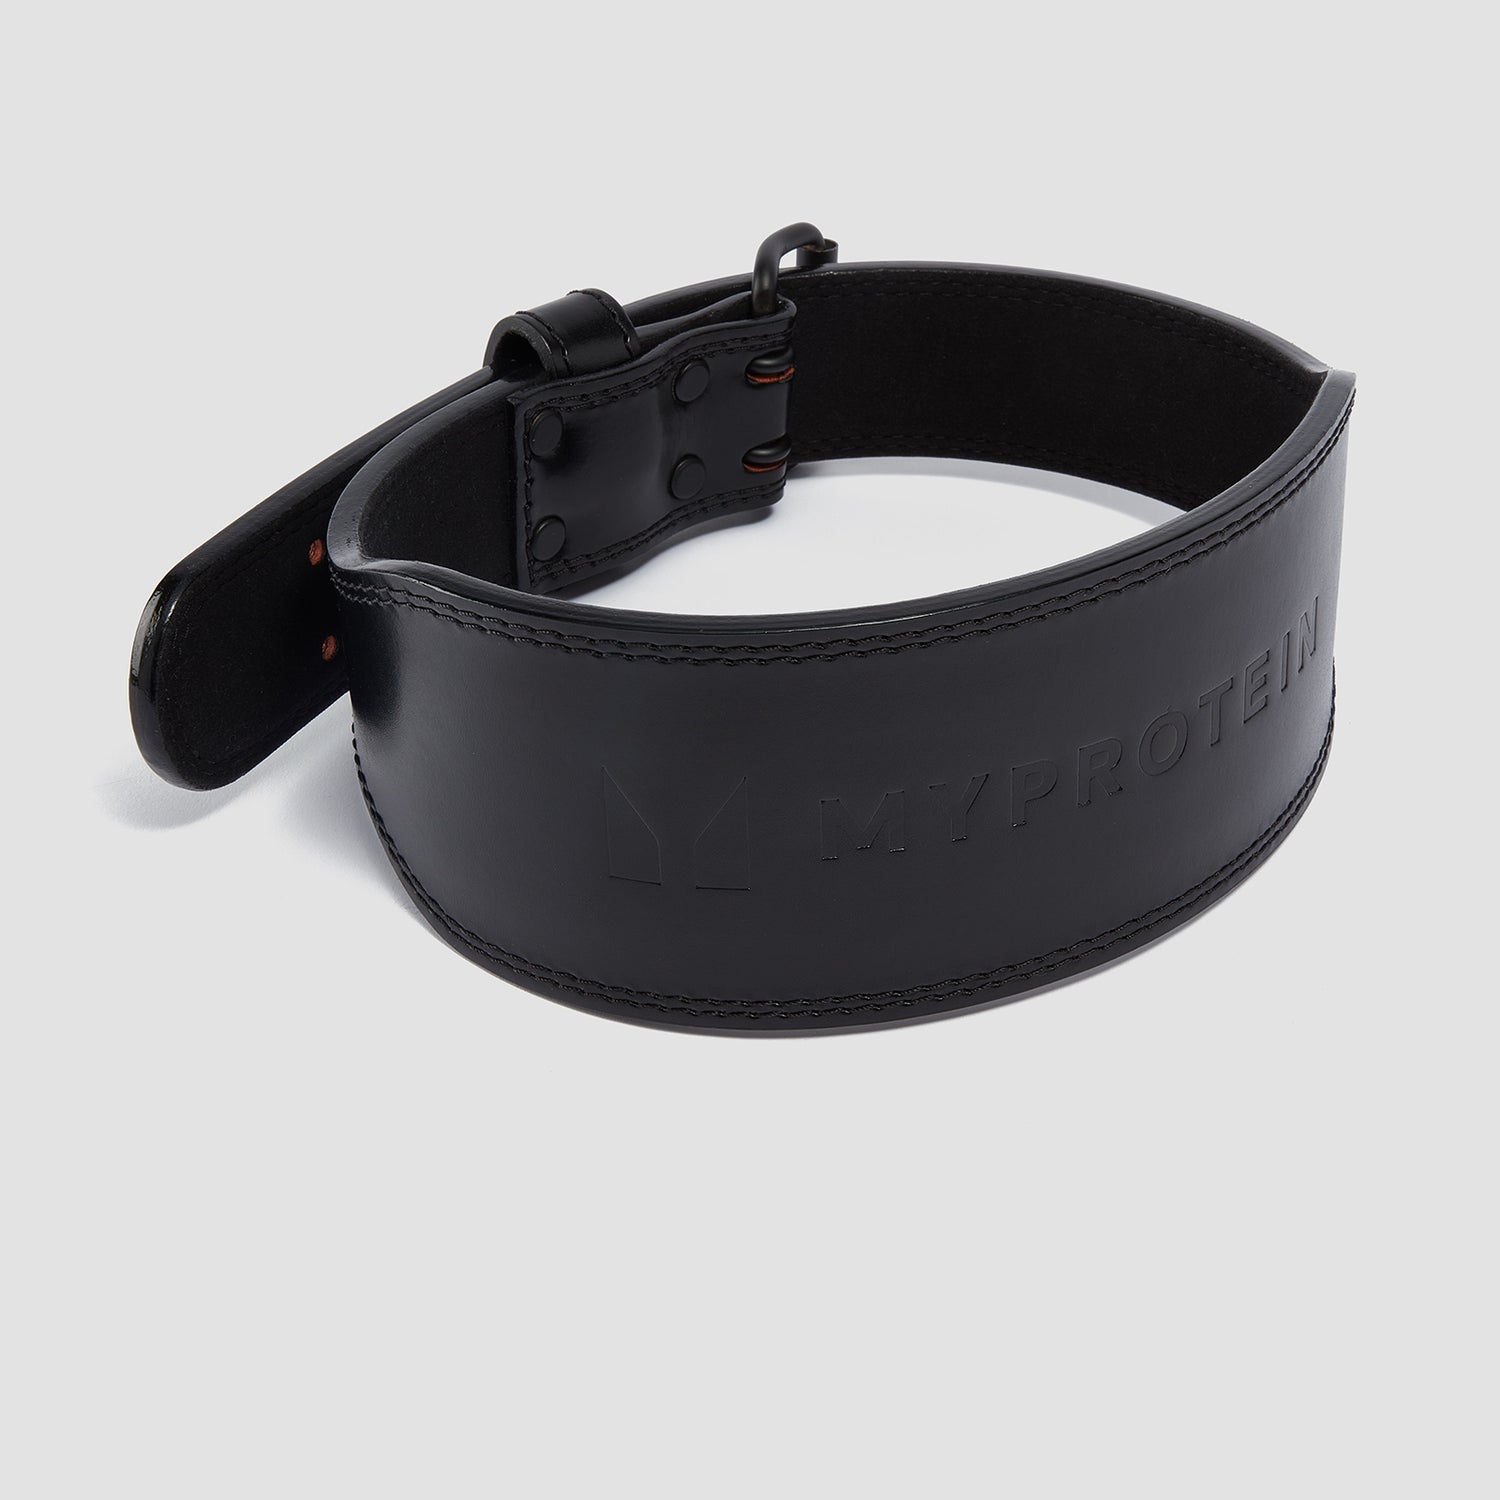 Myprotein Premium Leather Lifting Belt - Black - Small (23-32 Inch)